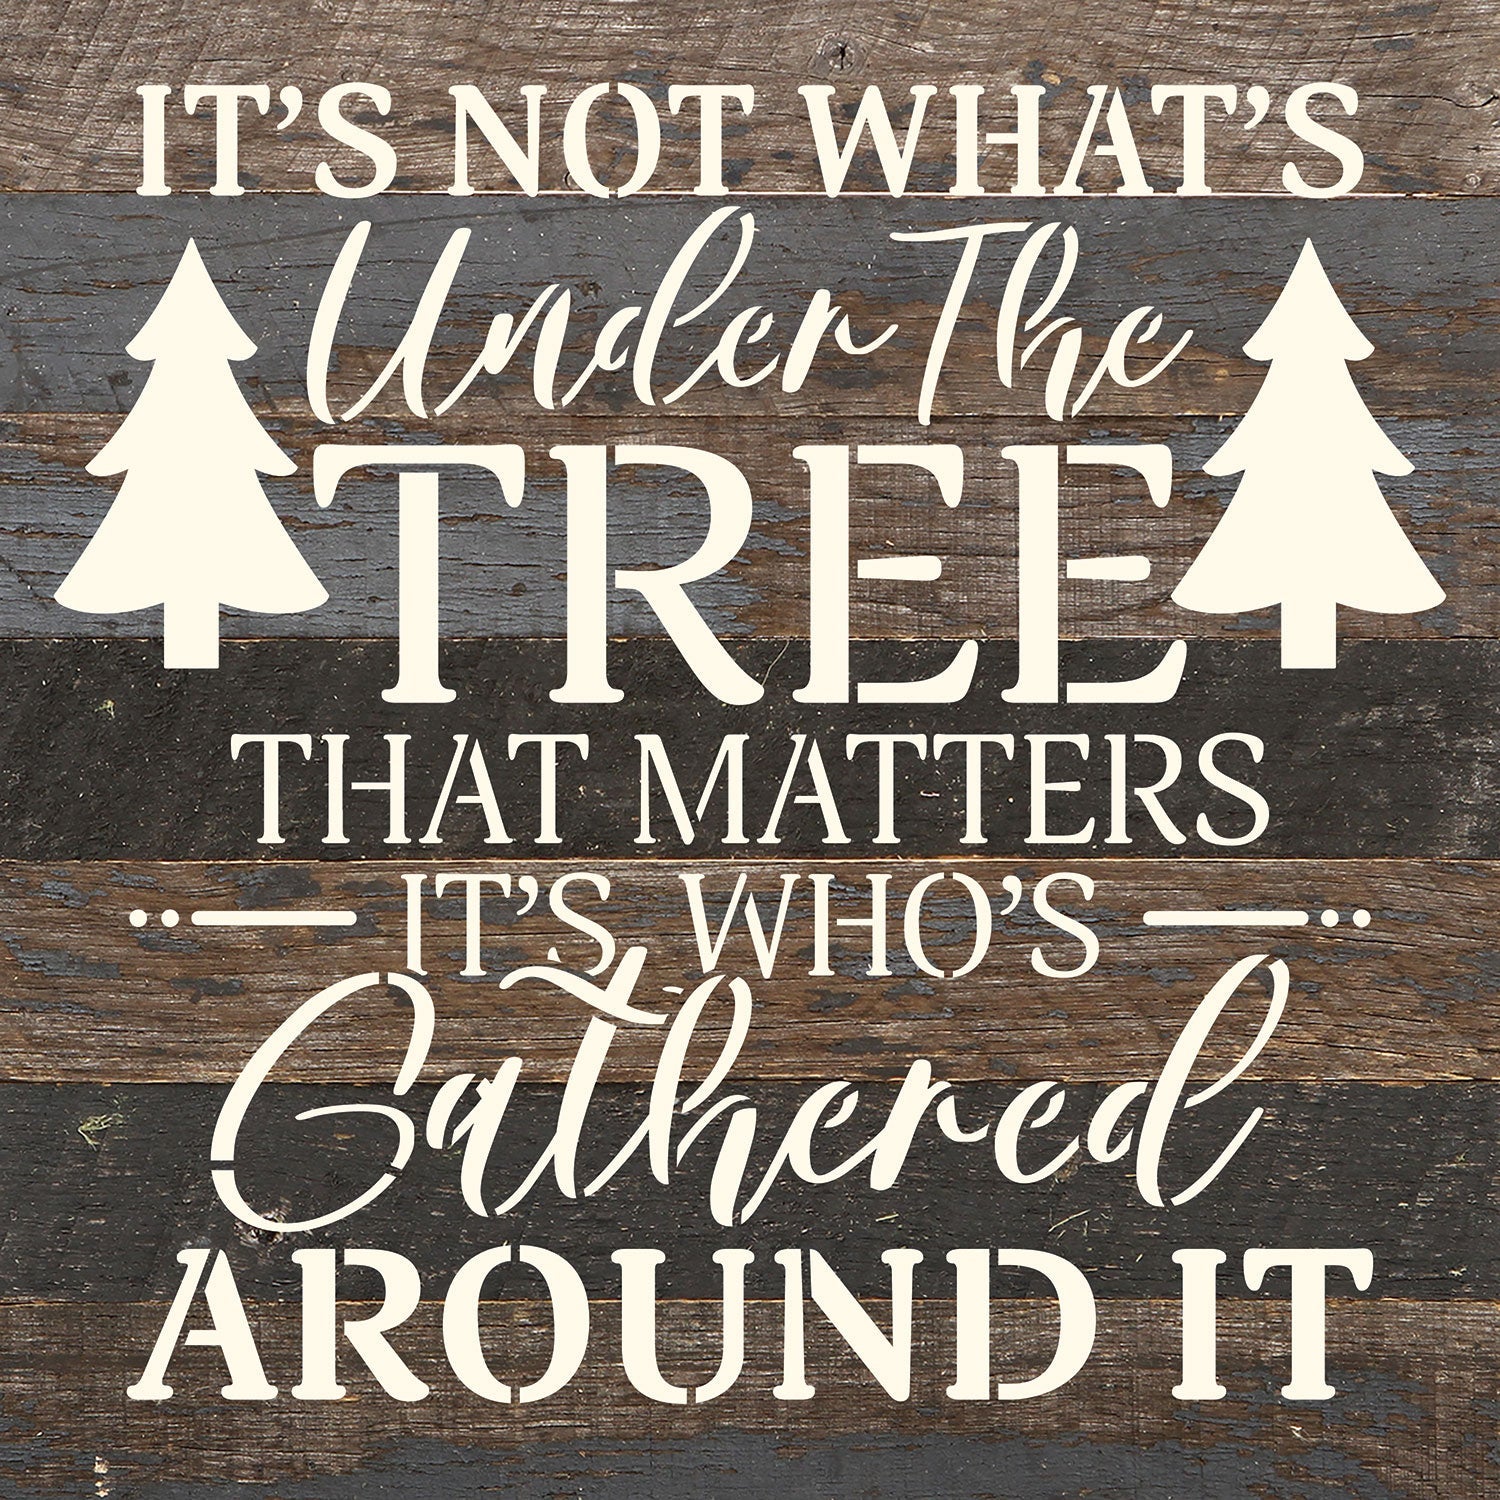 It's not what's under the tree that matters it's who's gathered around it / 10x10 Reclaimed Wood Wall Decor